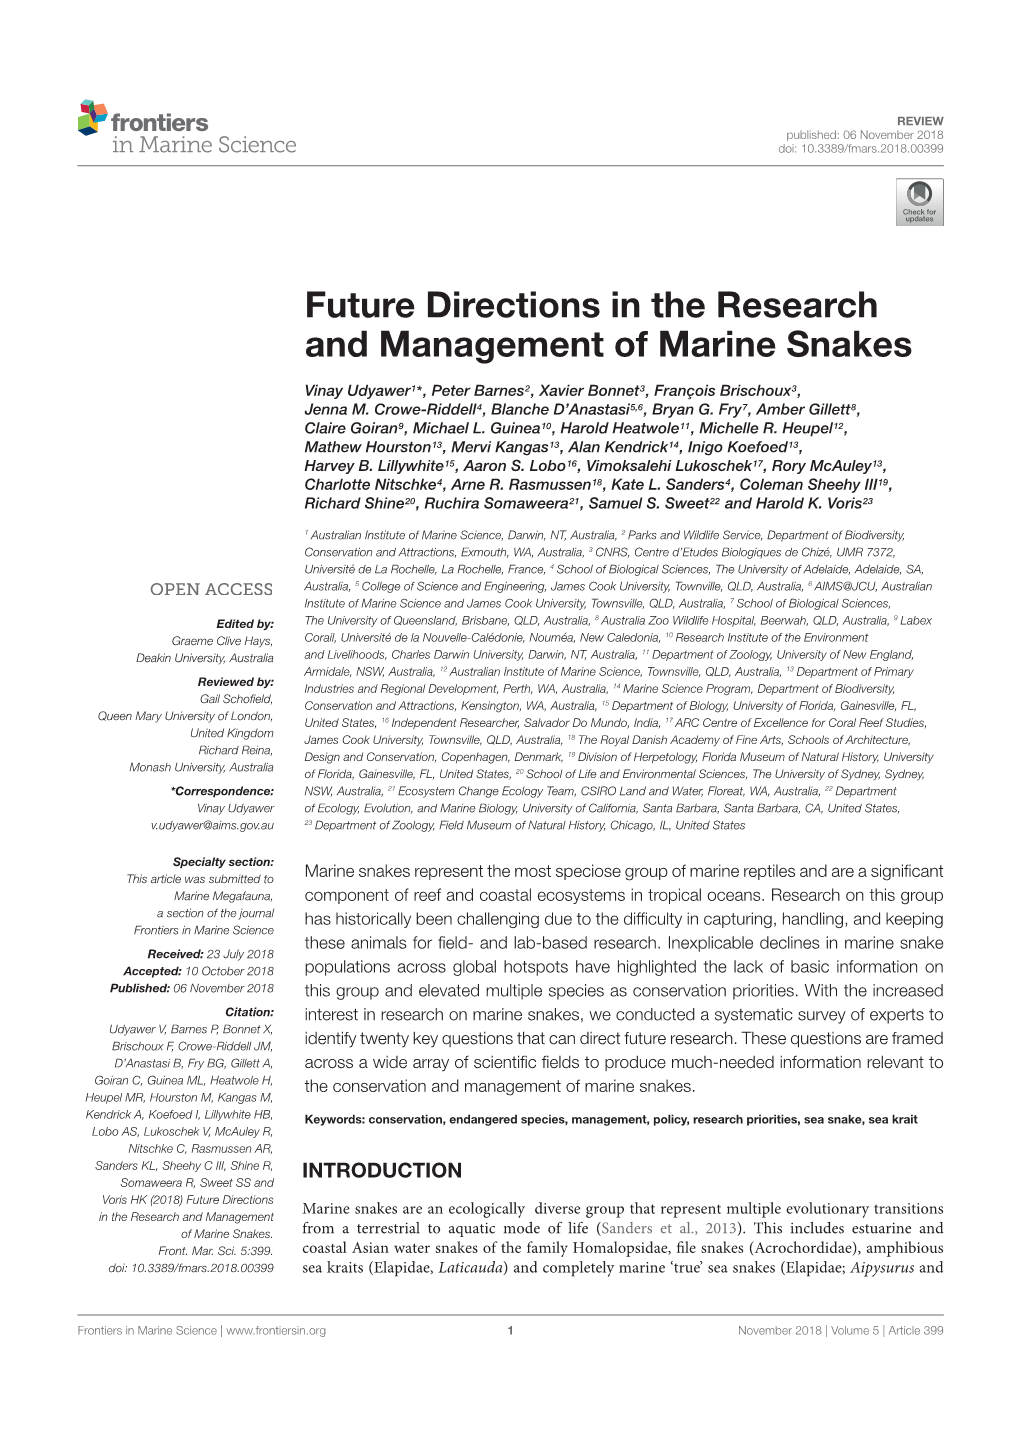 Future Directions in the Research and Management of Marine Snakes